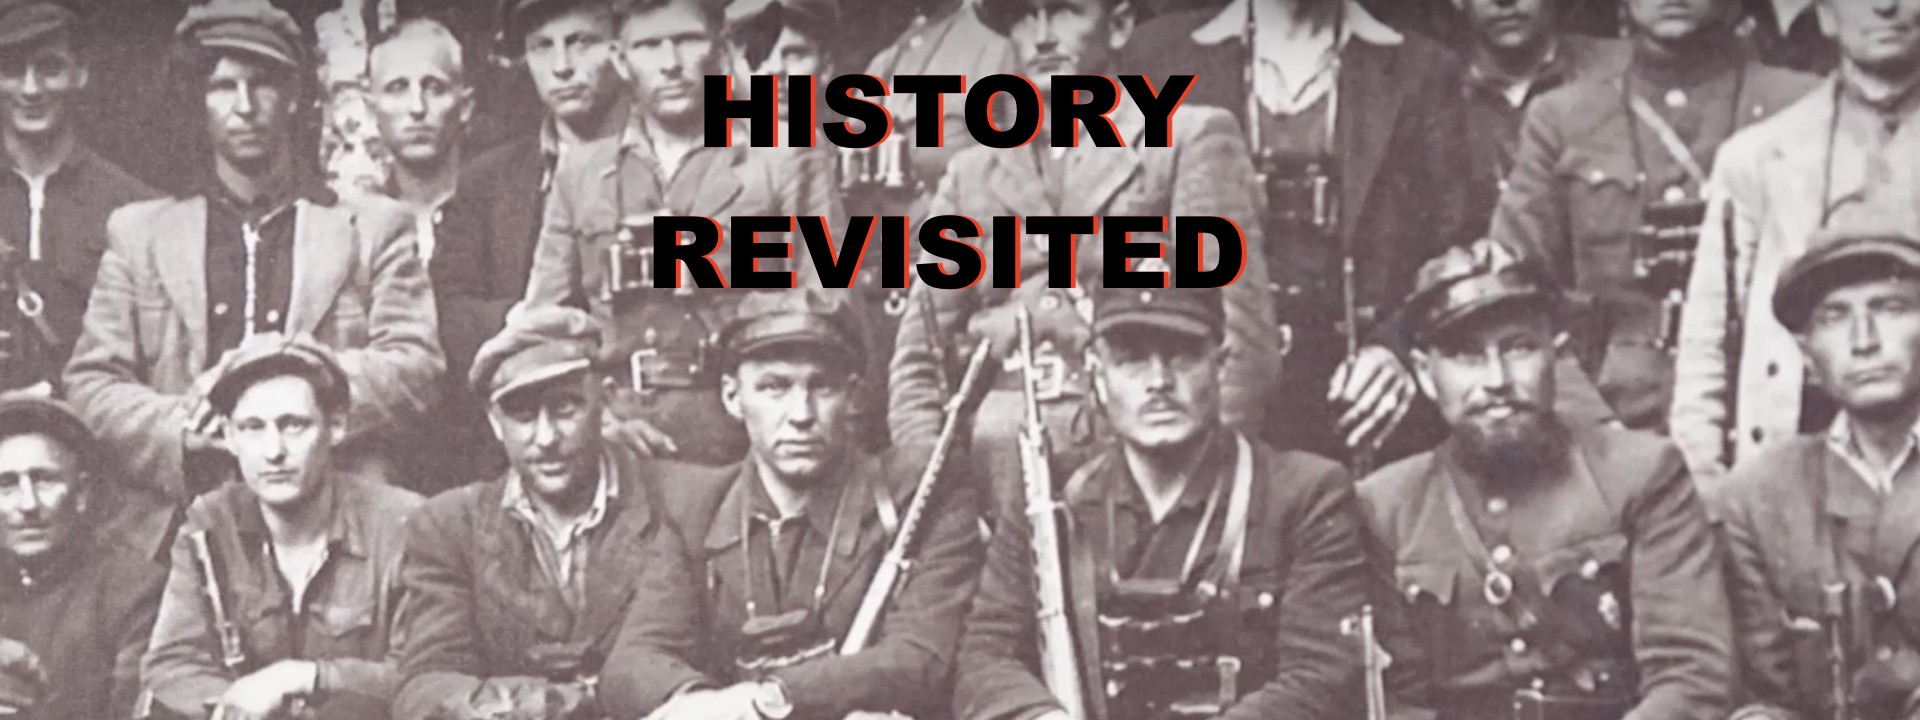 History Revisited: The Forest Brothers